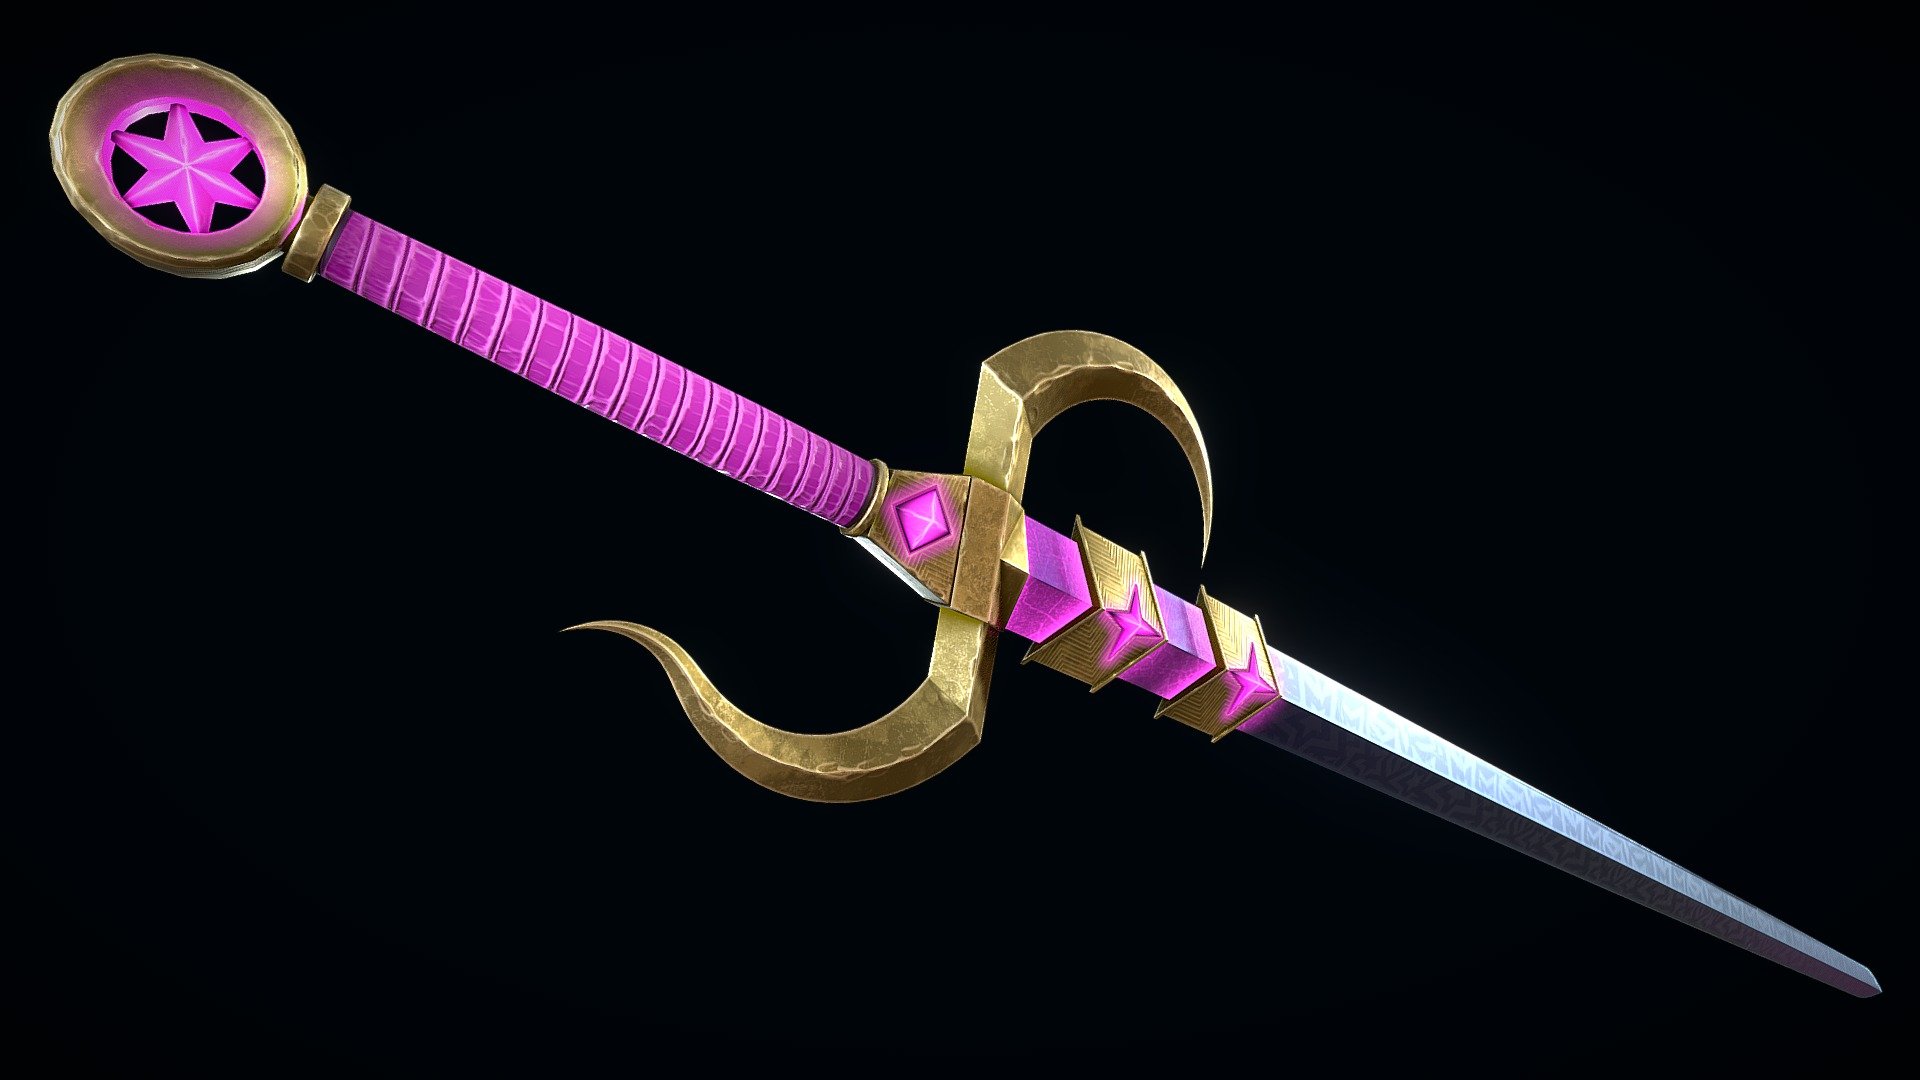 Low-poly 3D model of a Starlight Sword, sword from Terraria. This model doesn't contain any n-gons and has optimal topology. This model ha 2K textures 3d model